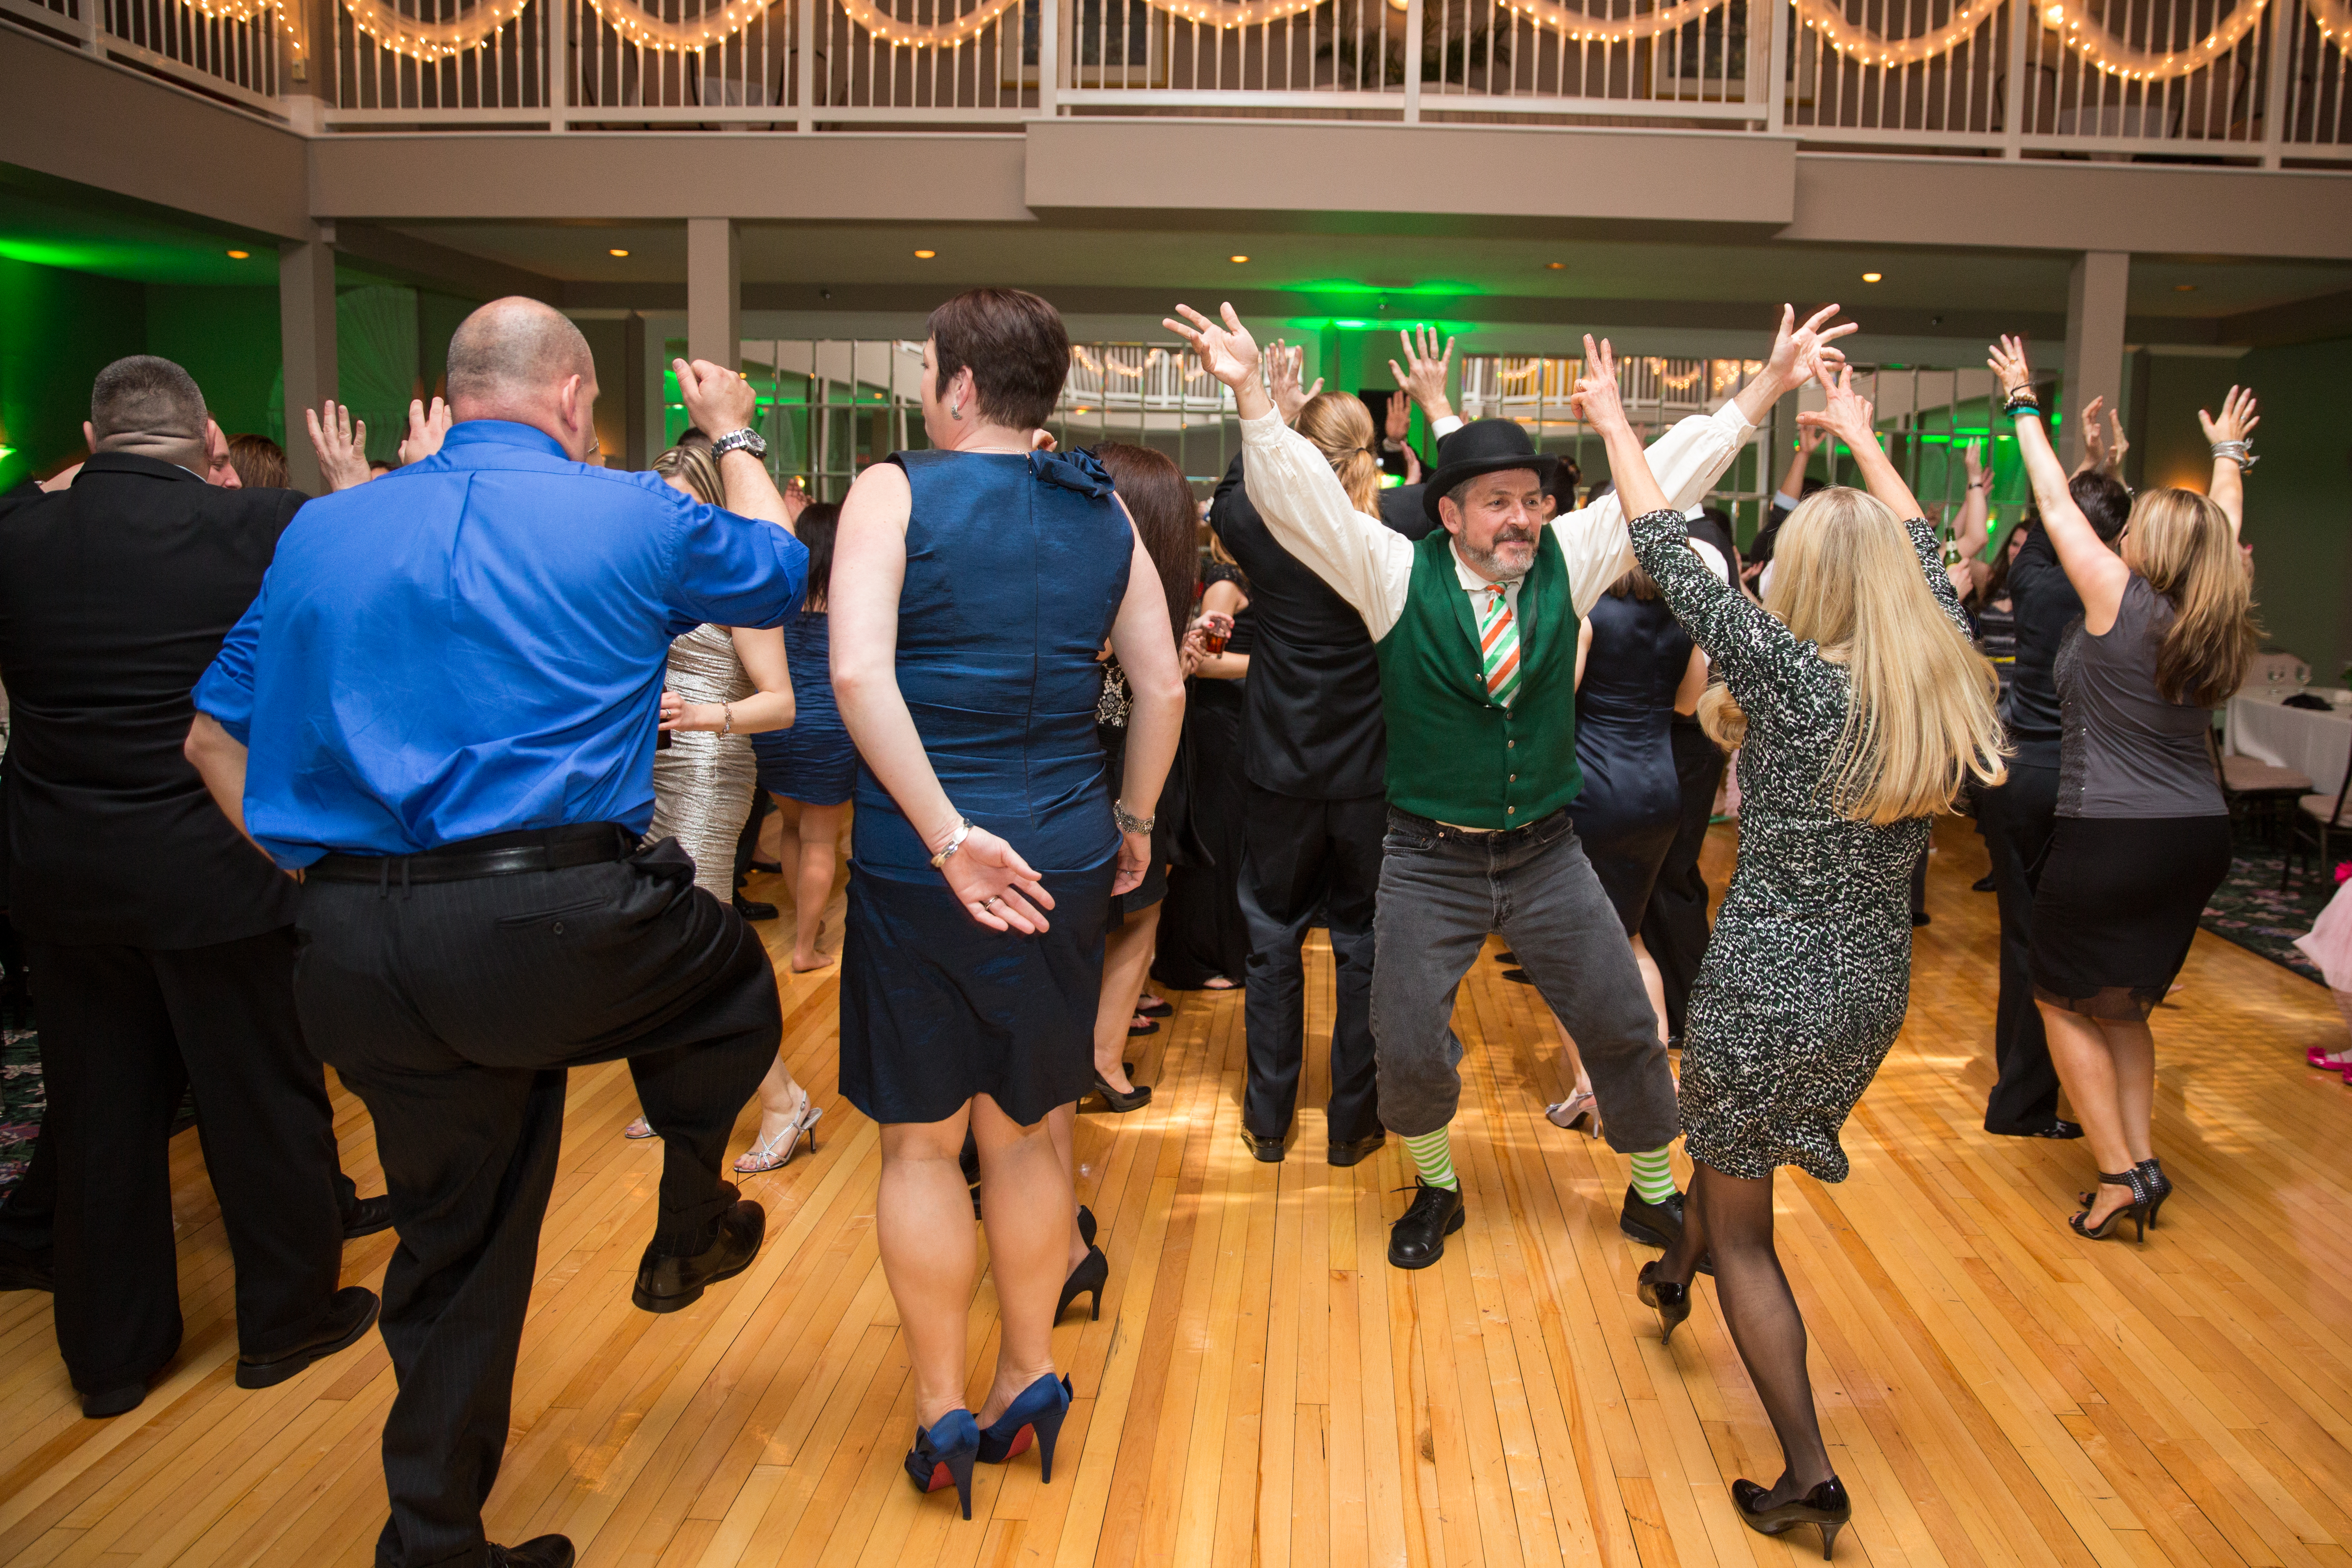 How To Have A St. Patrick's Day Themed Wedding